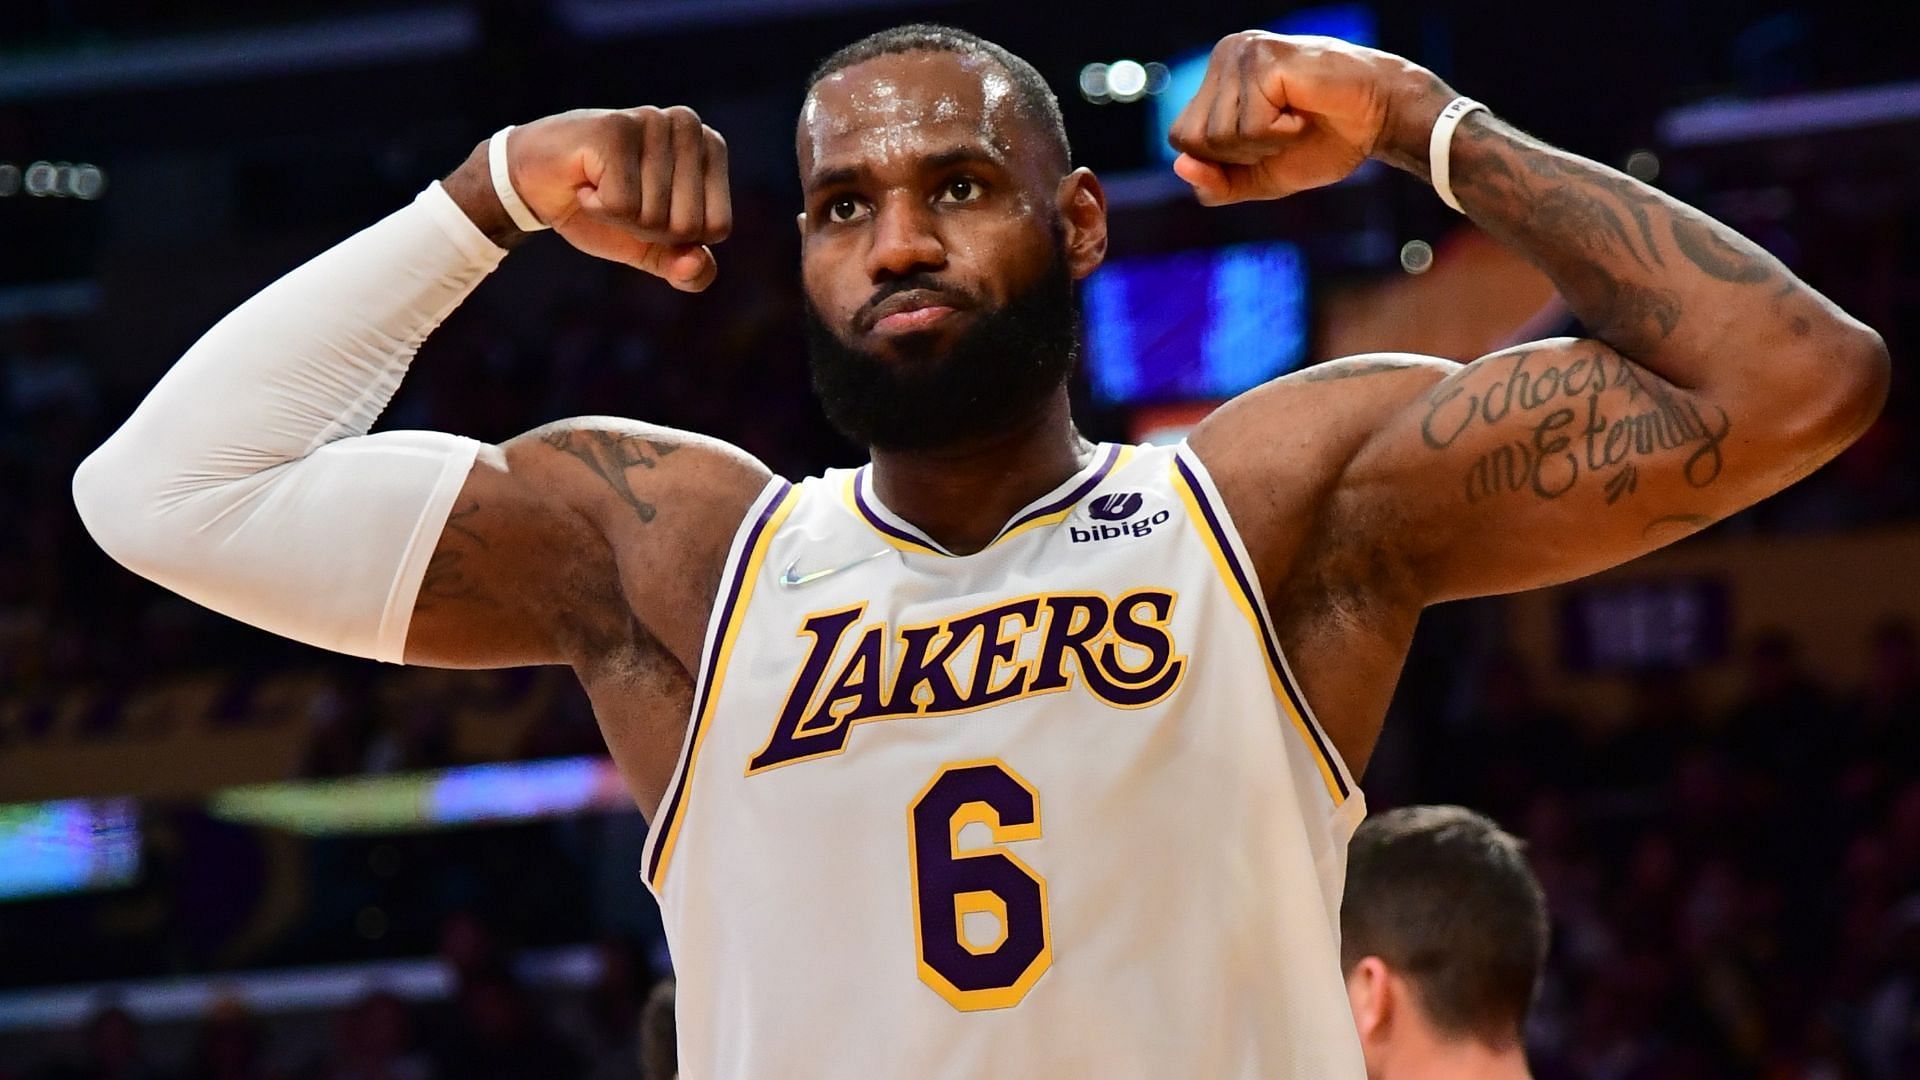 Nobody in the history of the NBA has combined basketball brilliance and longevity the way LeBron James has. [Photo: Sporting News]